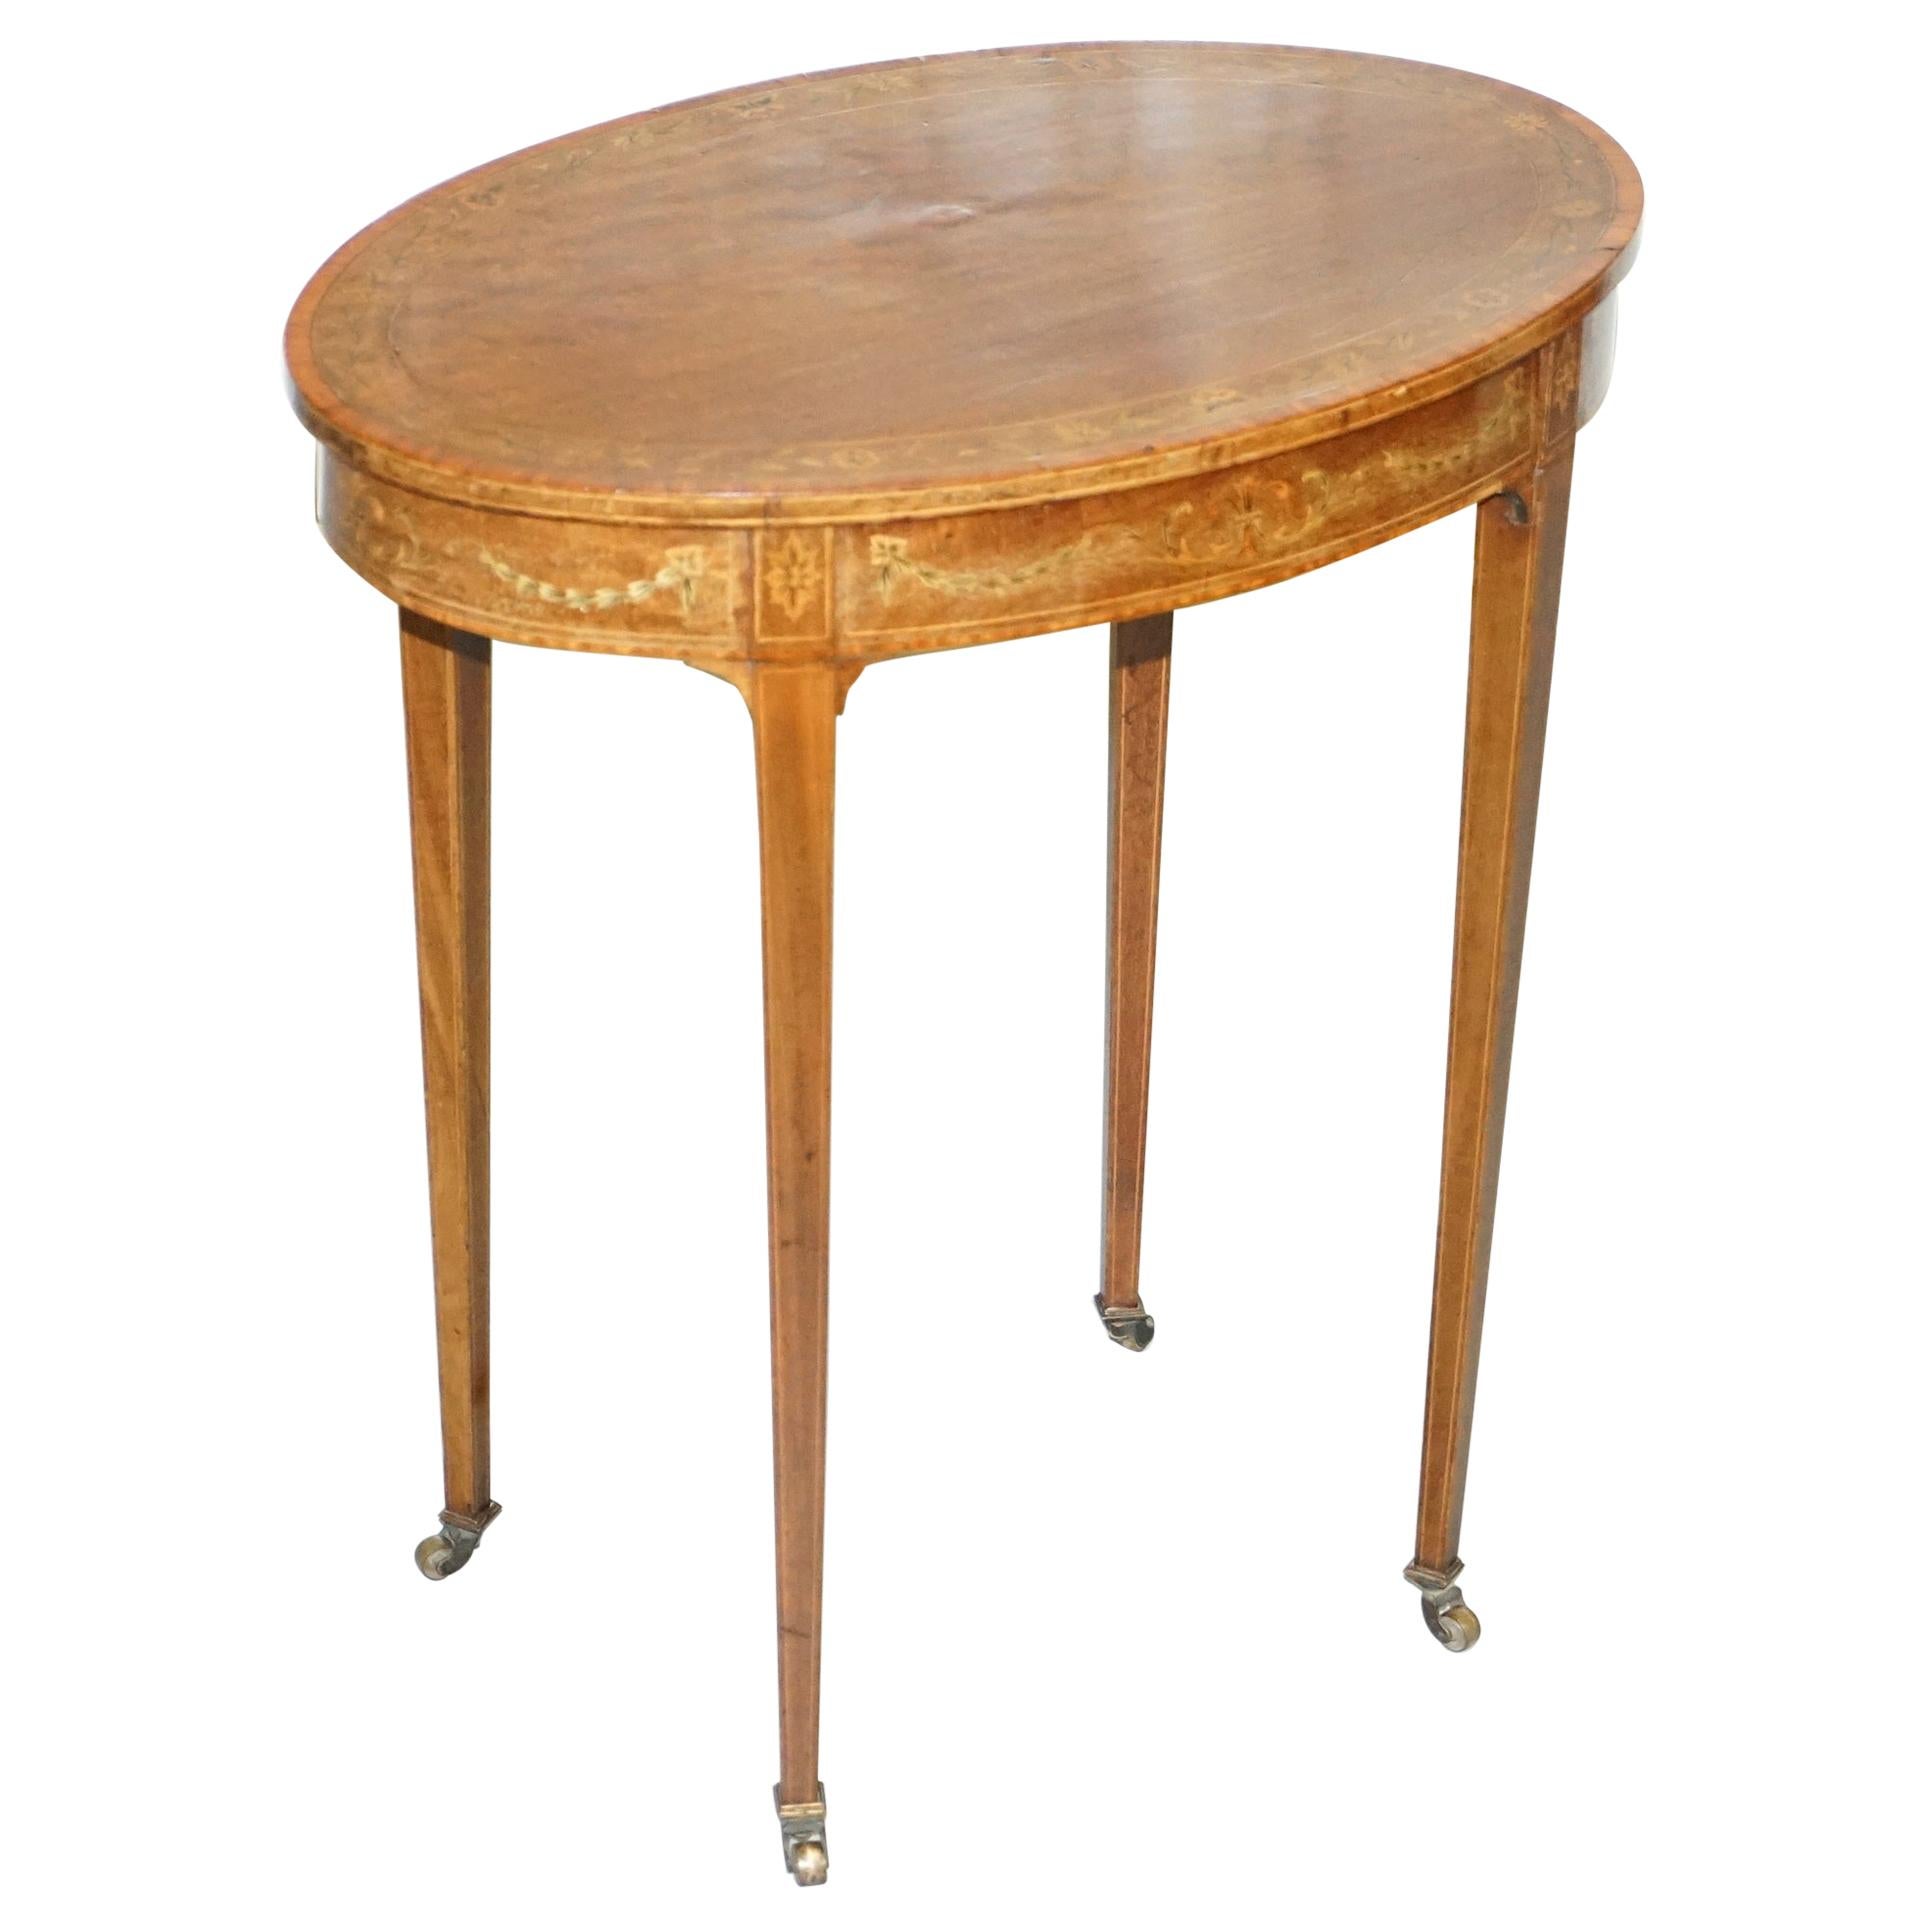 Stunning Floral Inlaid Sheraton Victorian Walnut Oval Occasional Side End Table For Sale